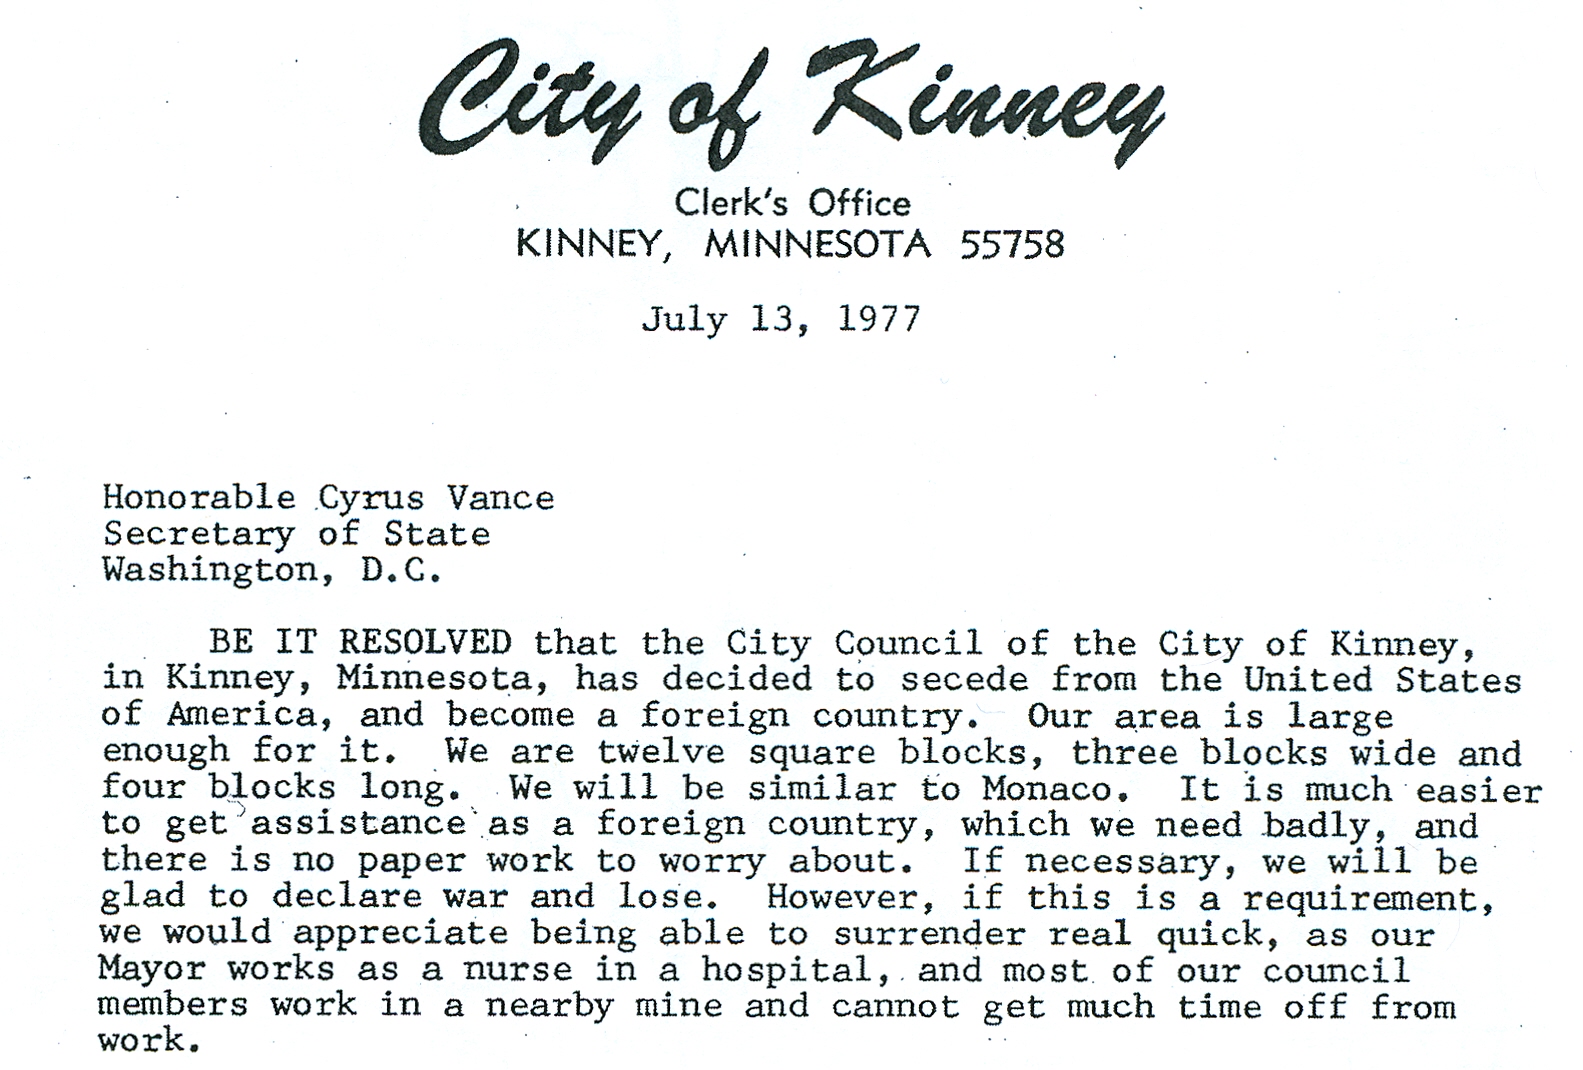 1977 proclamation of secession from Kinney